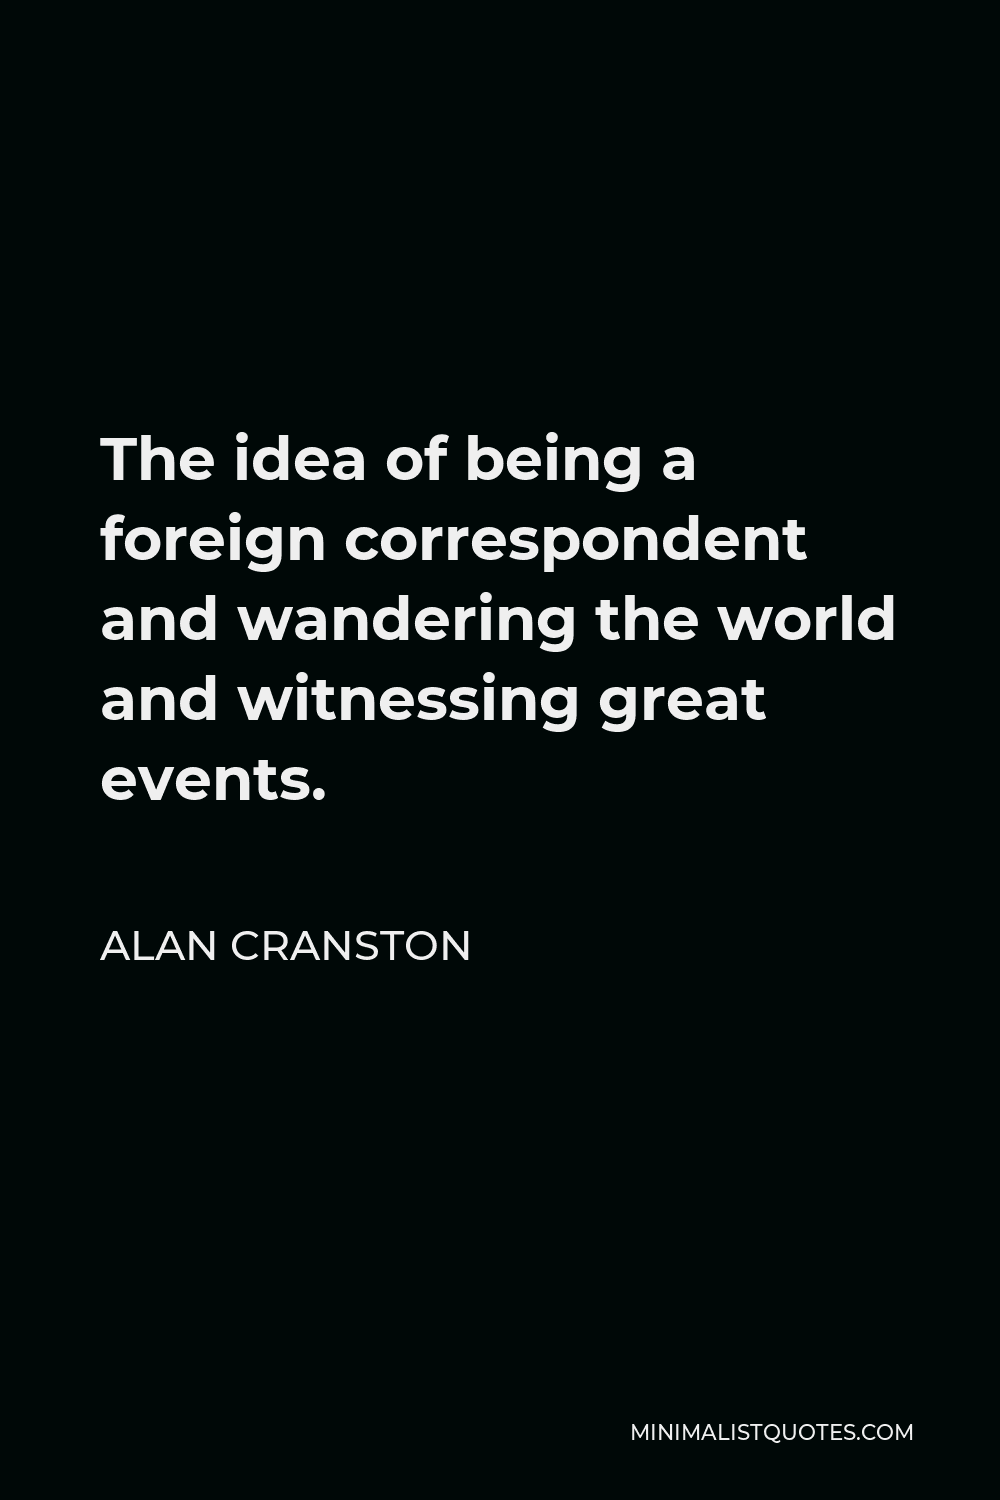 Alan Cranston Quote - The idea of being a foreign correspondent and wandering the world and witnessing great events.